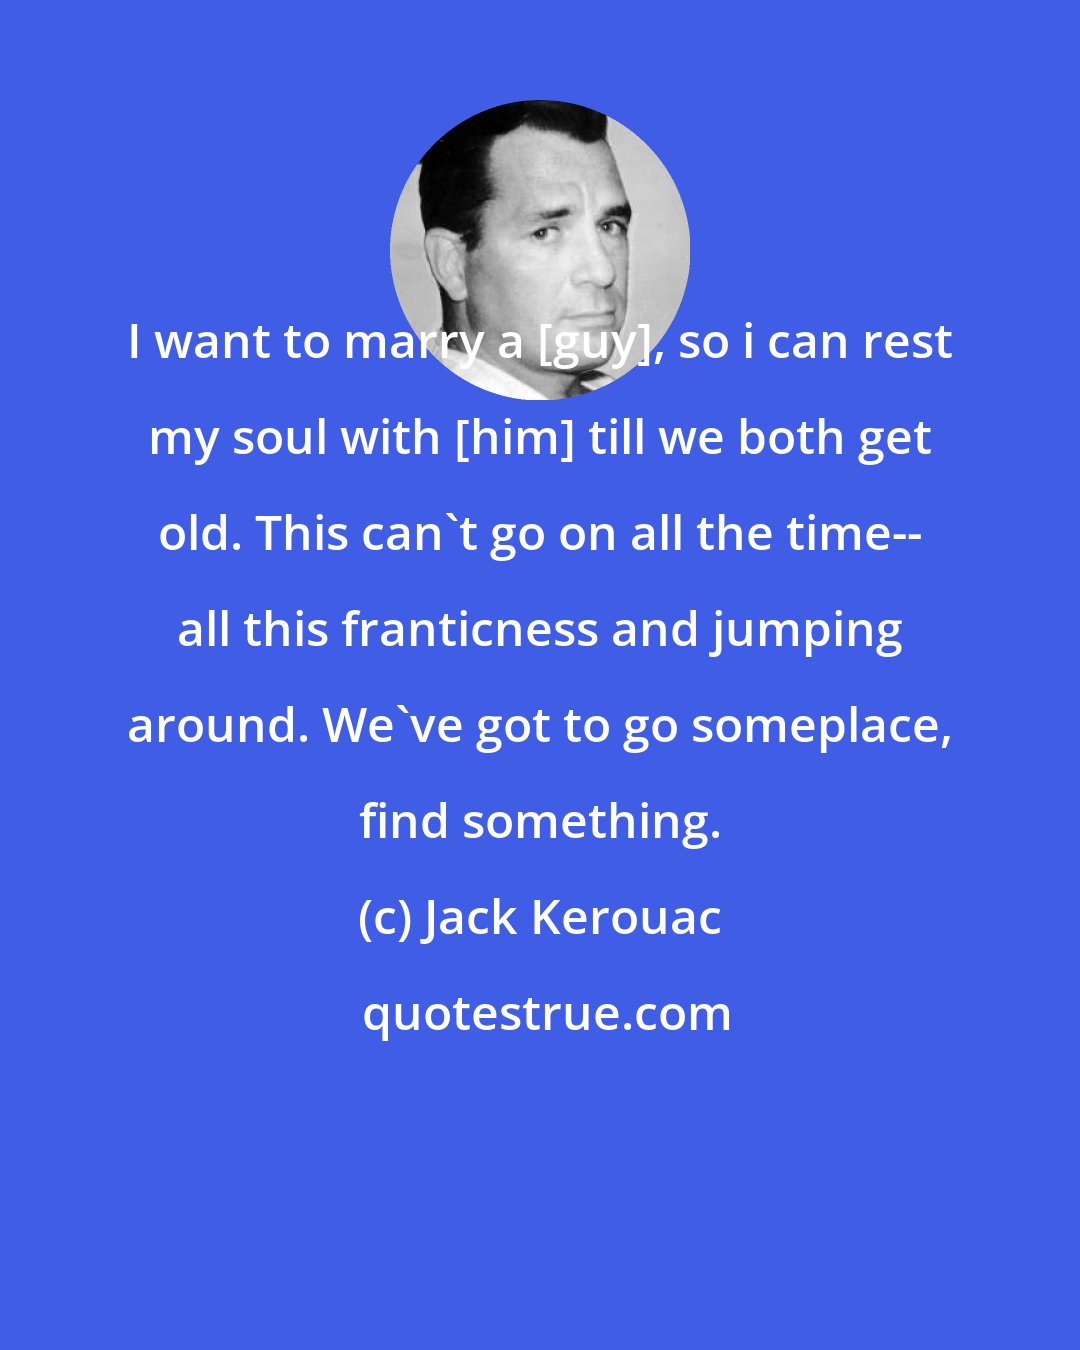 Jack Kerouac: I want to marry a [guy], so i can rest my soul with [him] till we both get old. This can't go on all the time-- all this franticness and jumping around. We've got to go someplace, find something.